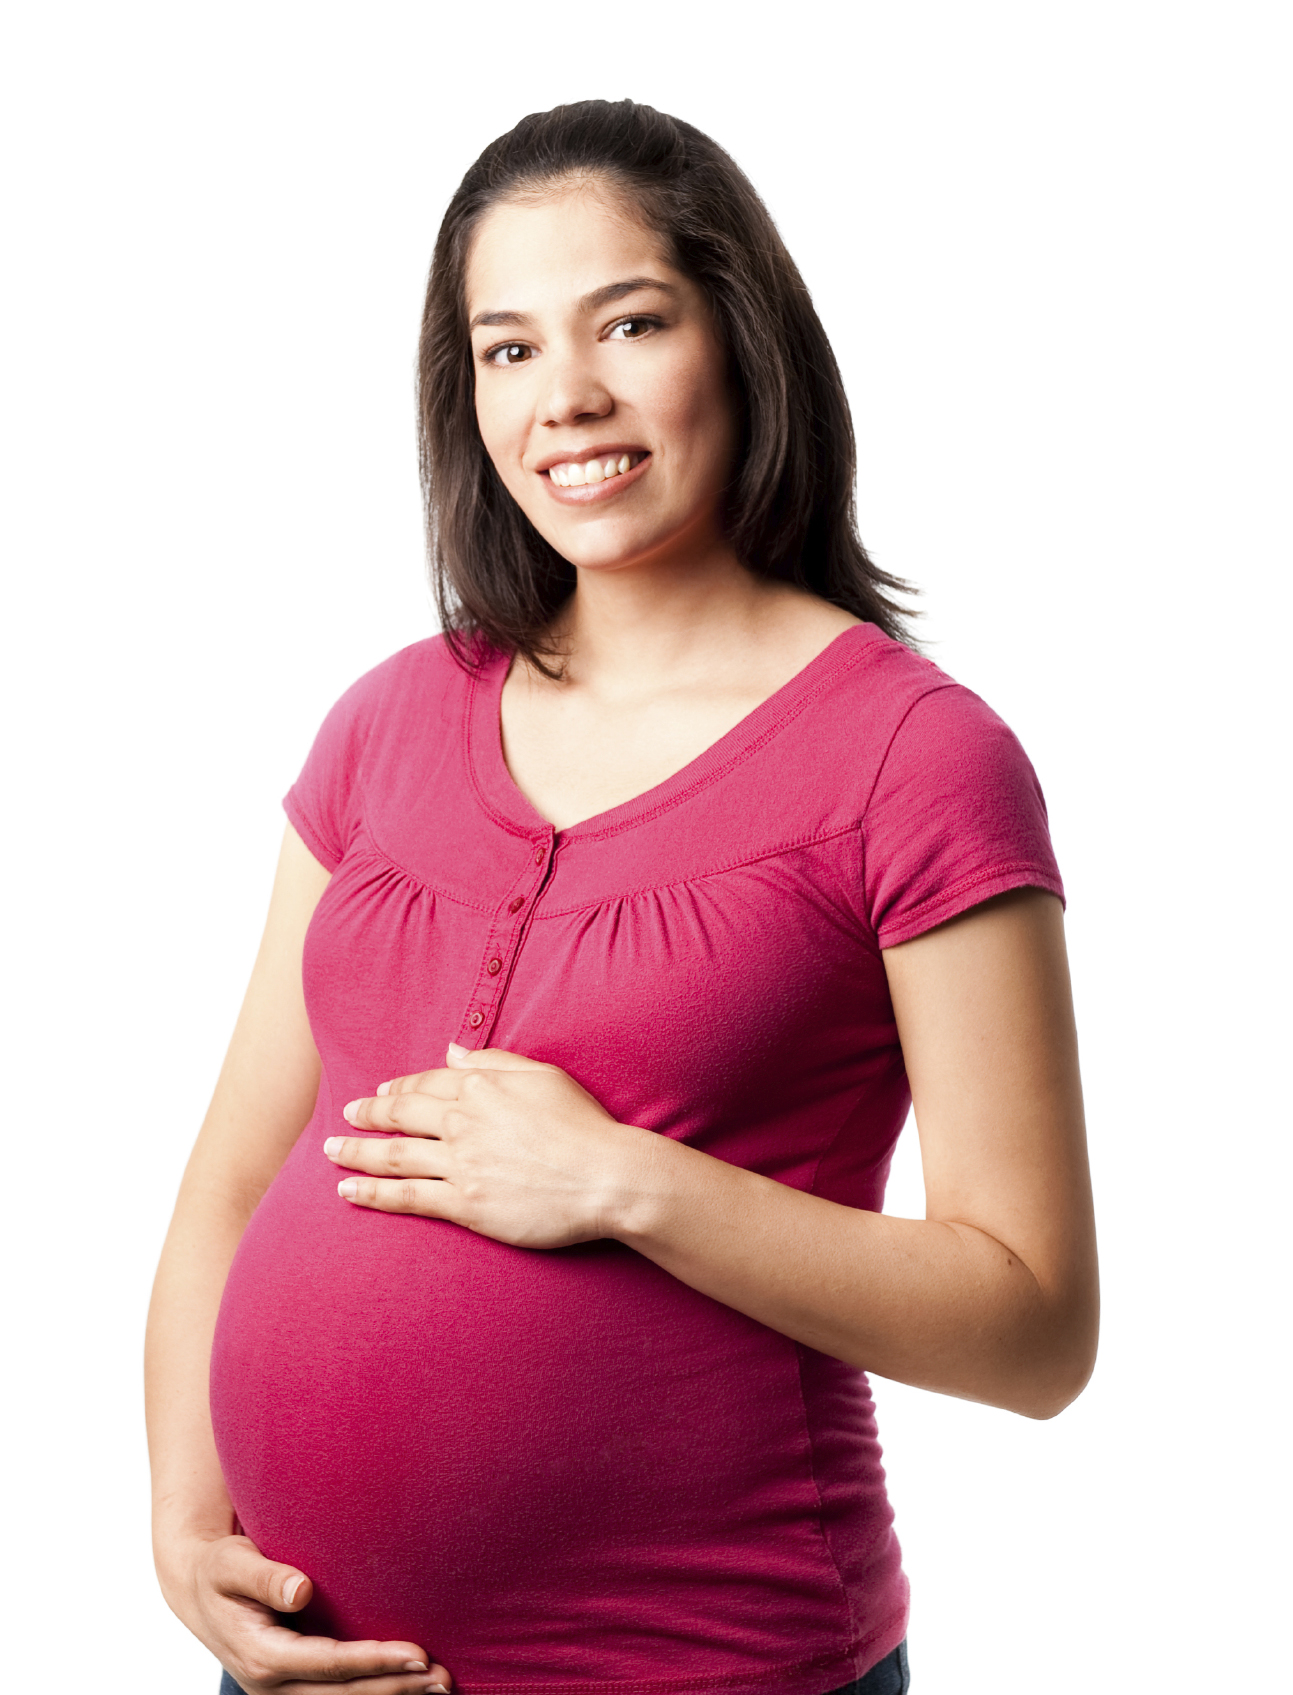 Pregnancy Symptoms - How To Know You Are Pregnant